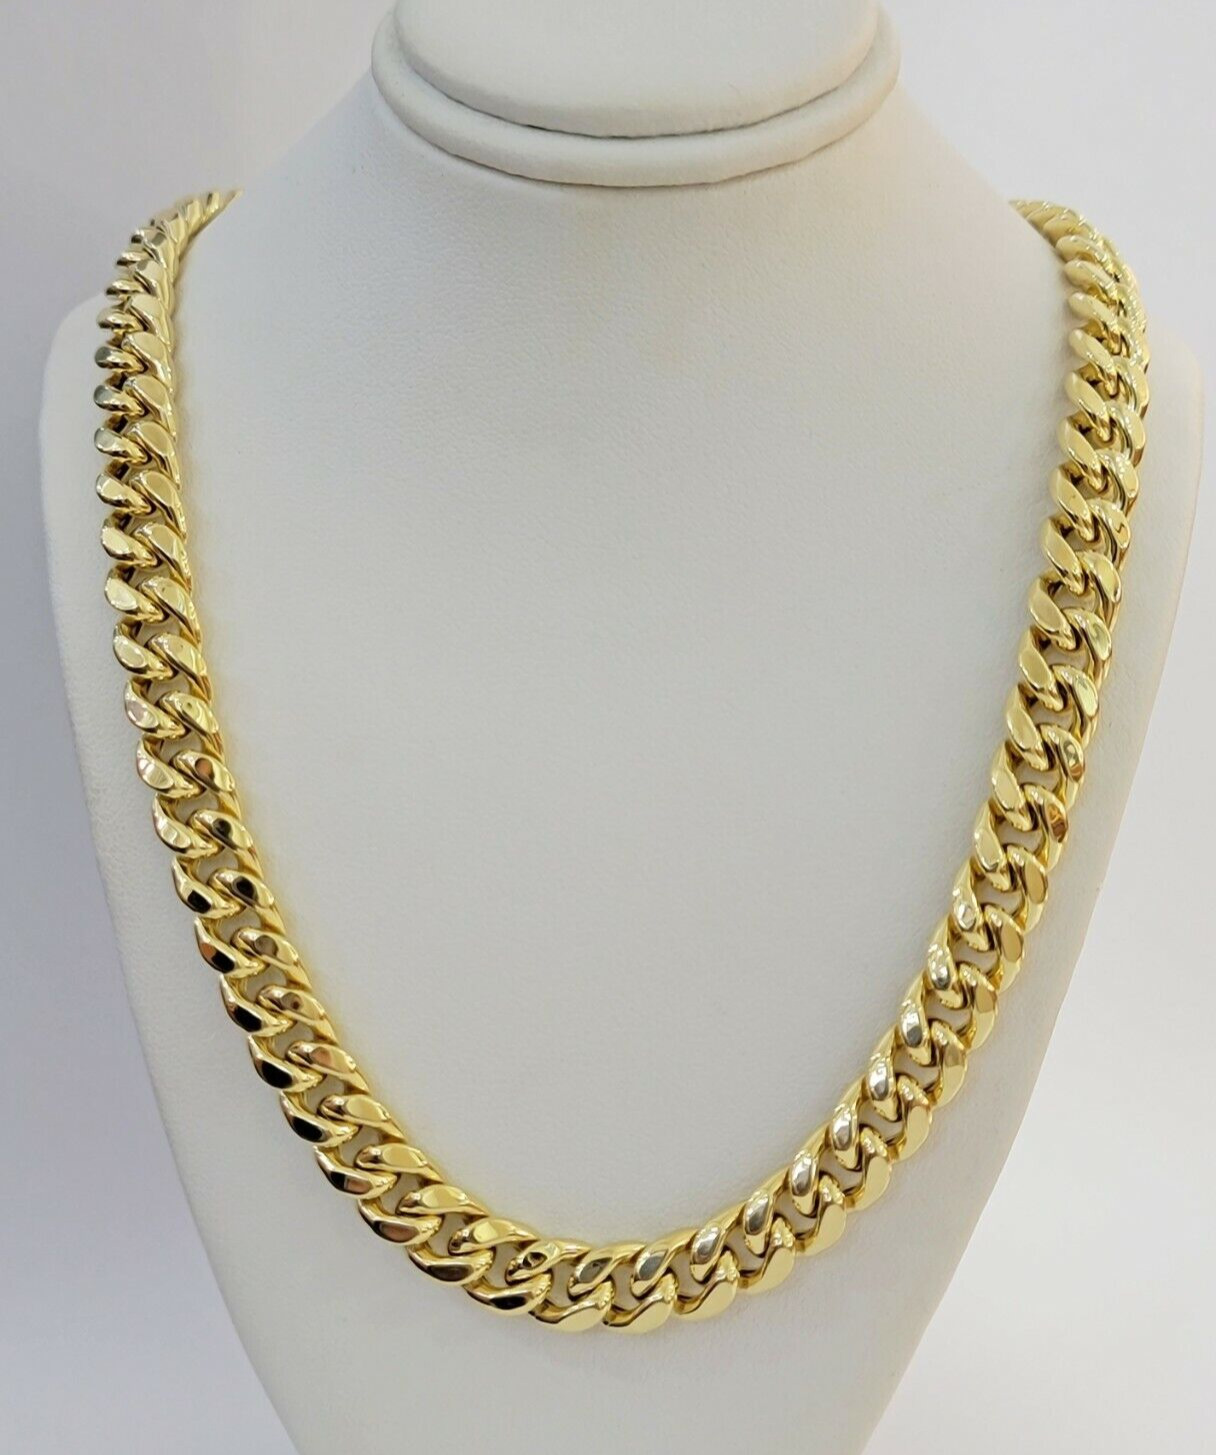 Real 14k Gold Chain 24 Inch Miami Cuban Link Necklace 9mm Strong Men 14KT Gold